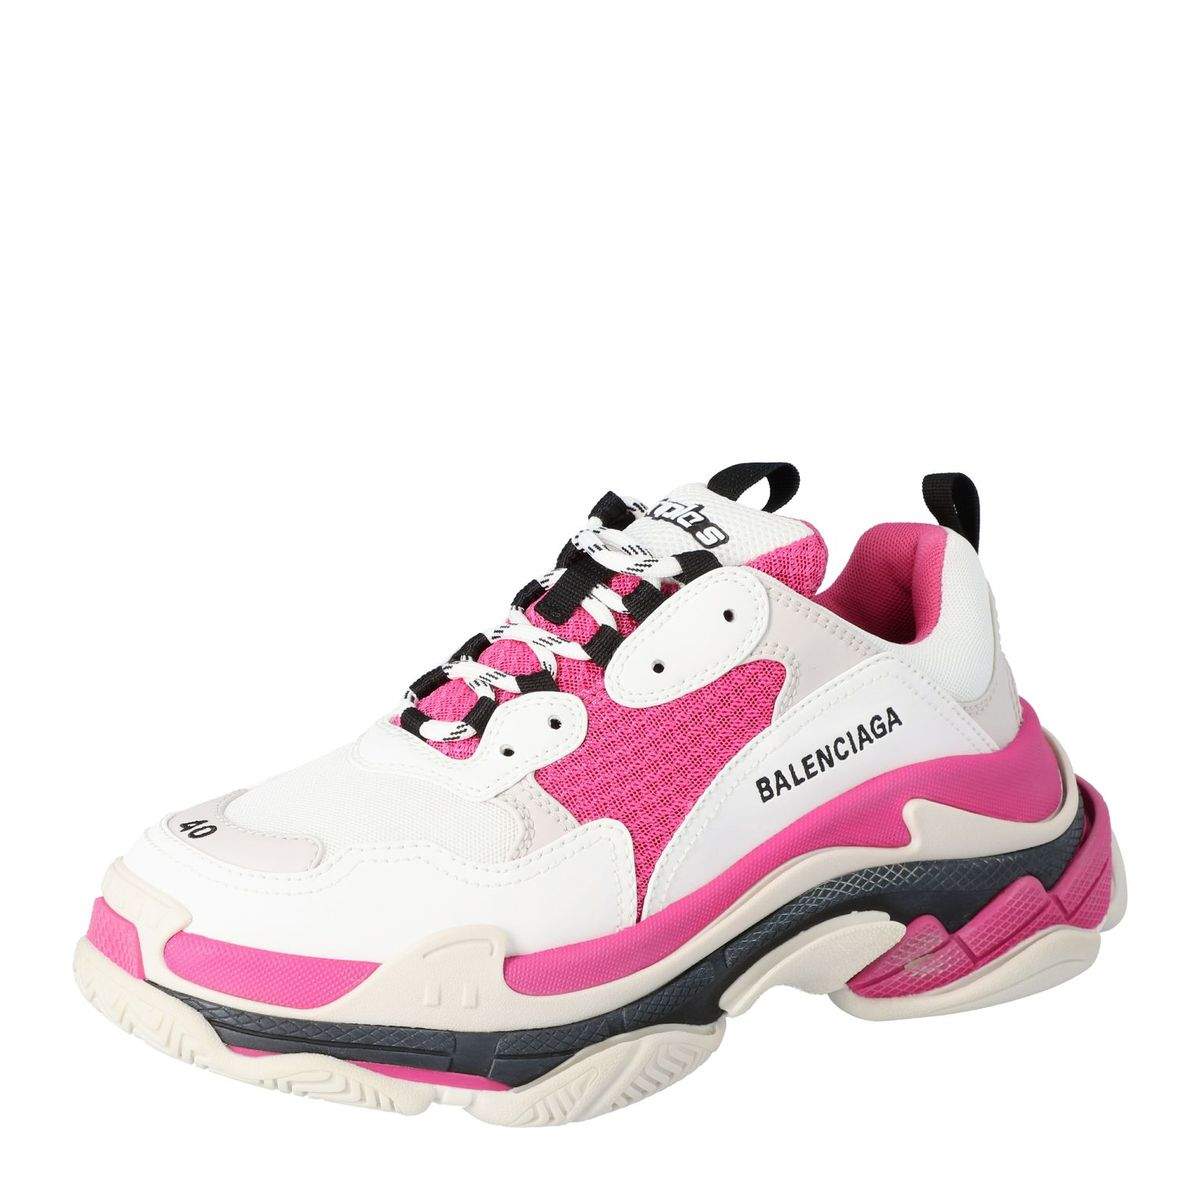 Balenciaga White/Pink Leather and Mesh Triple S Platform Sneakers Size ...